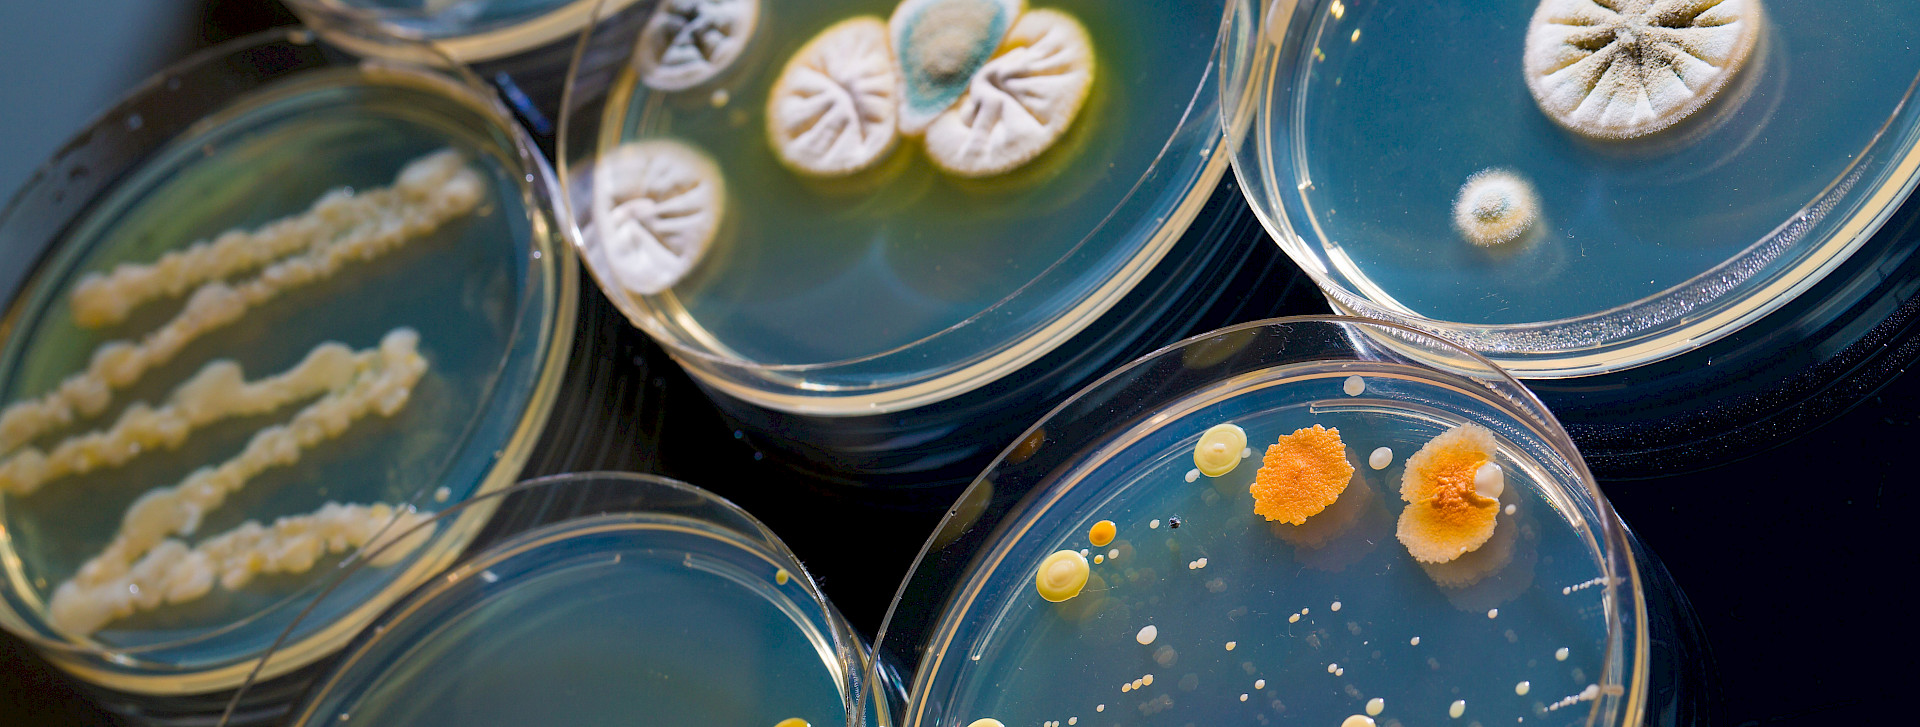 Petri dish with growing cultures of microorganisms and moulds